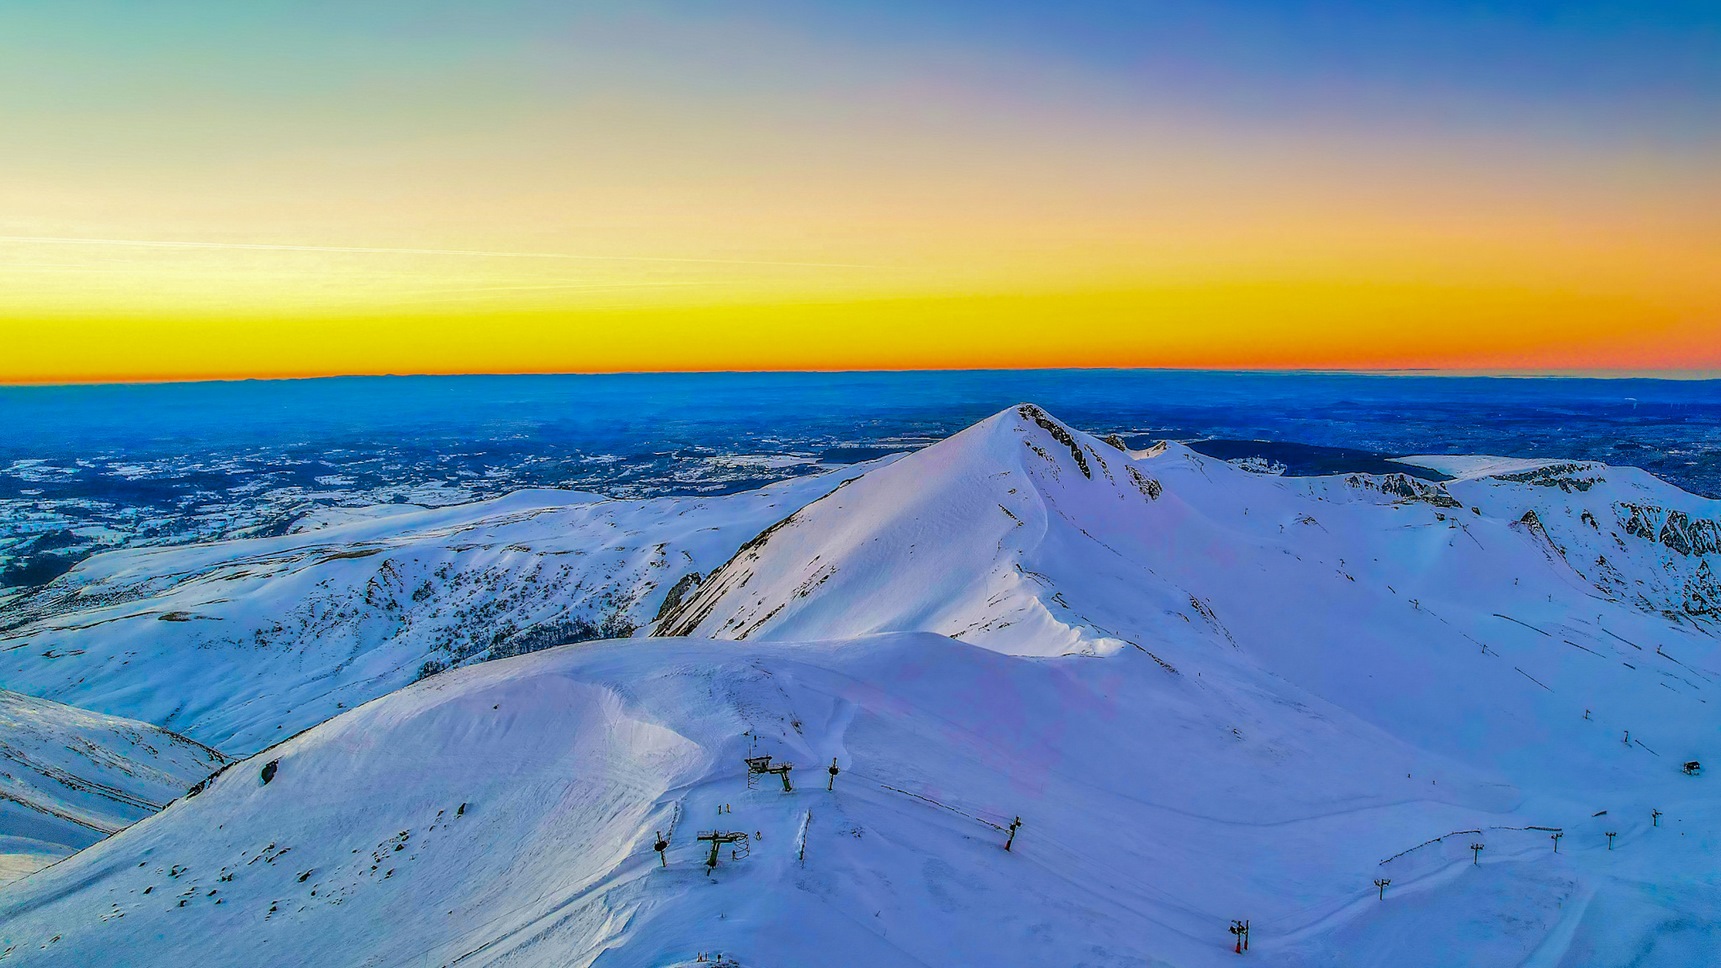 At the top of Puy Ferrand, magnificent view of Puy de Sancy at sunset